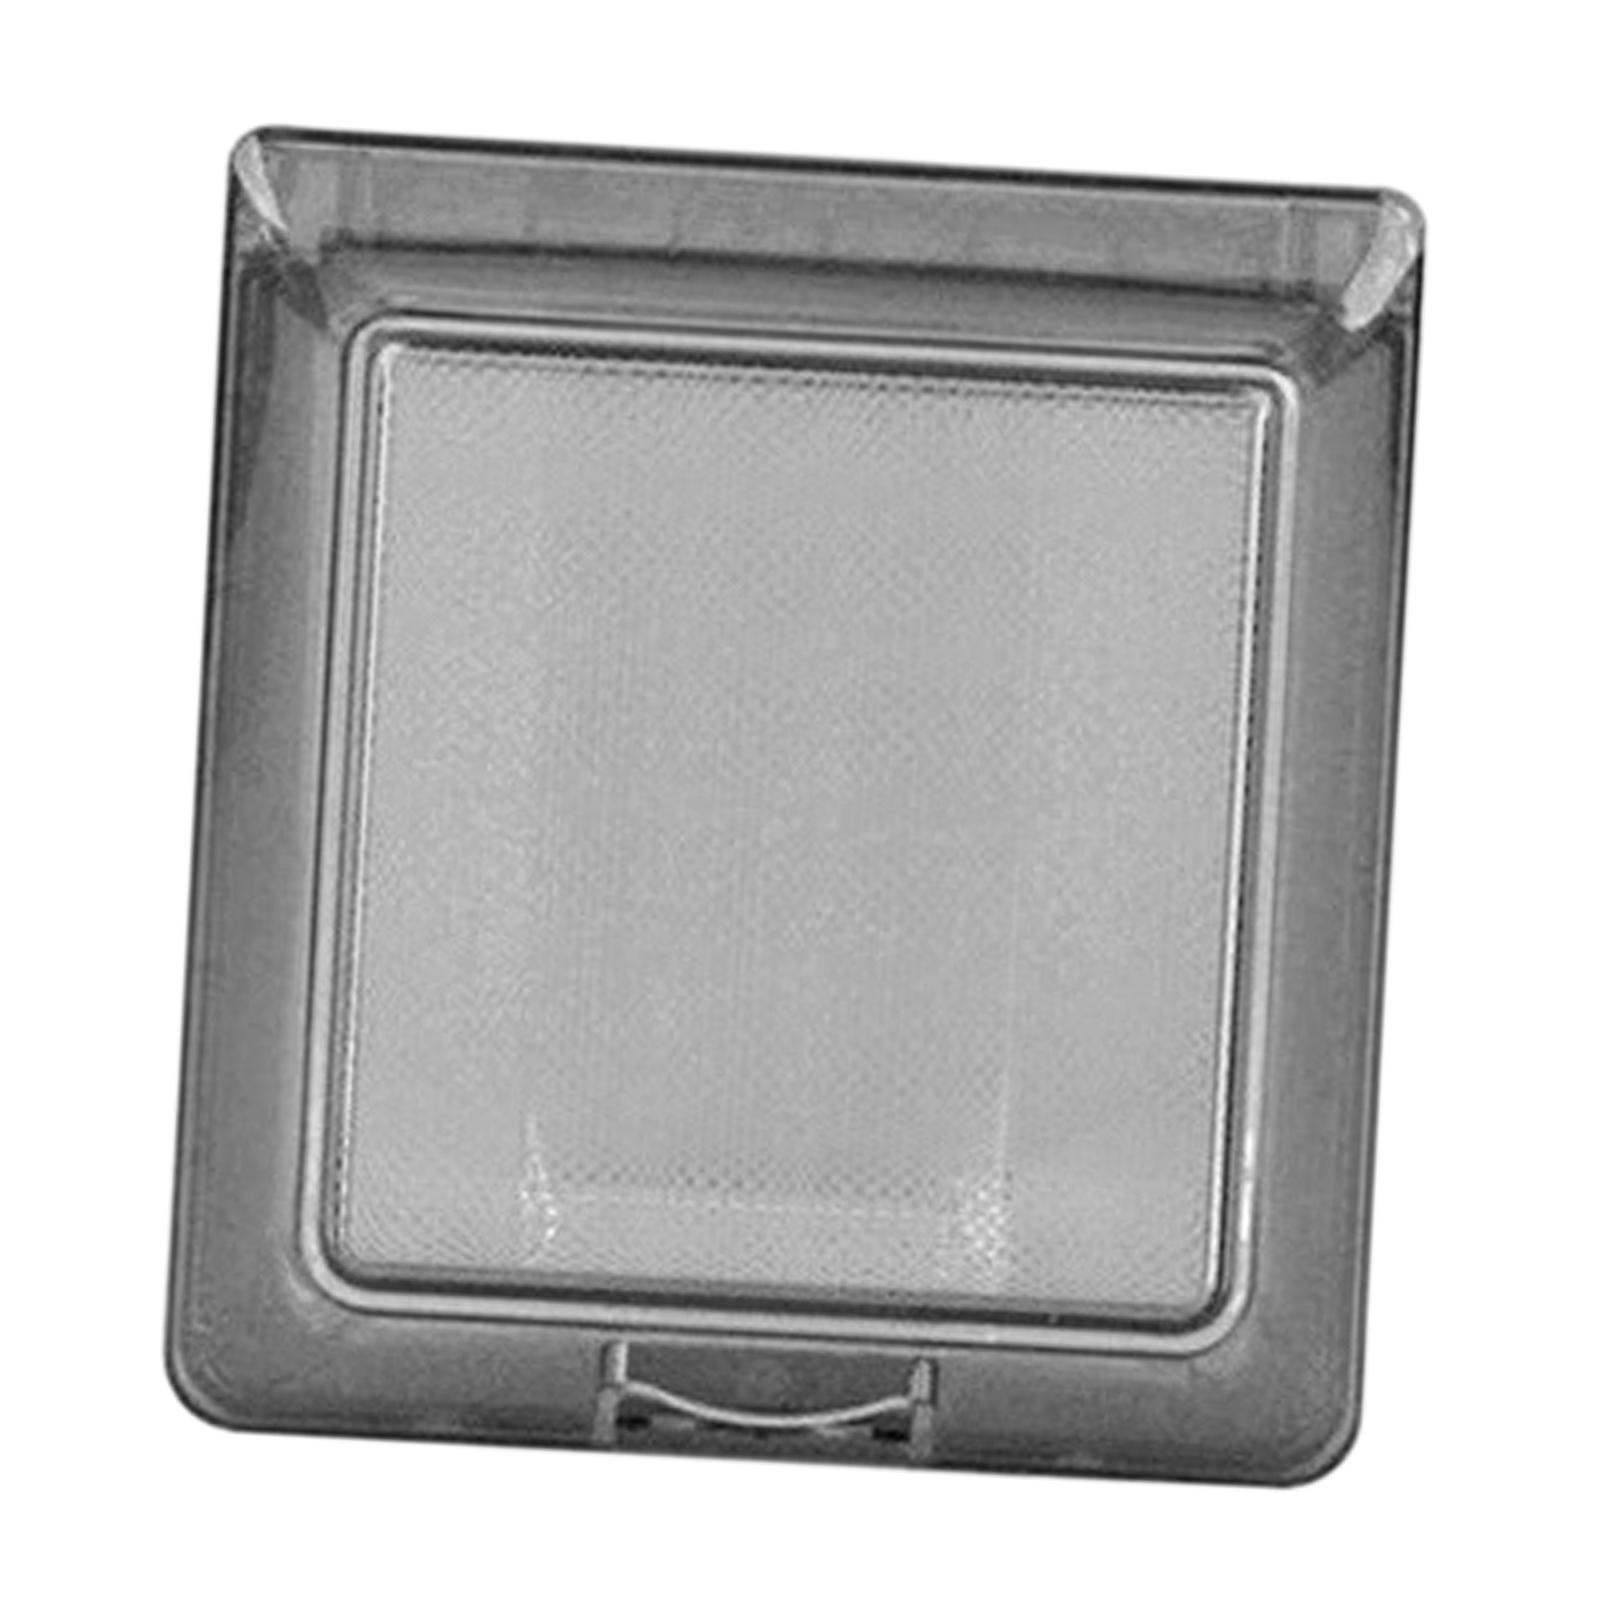 Switch Cover Waterproof Wall Switch Box for Home Improvement Workshop Office Clear Black